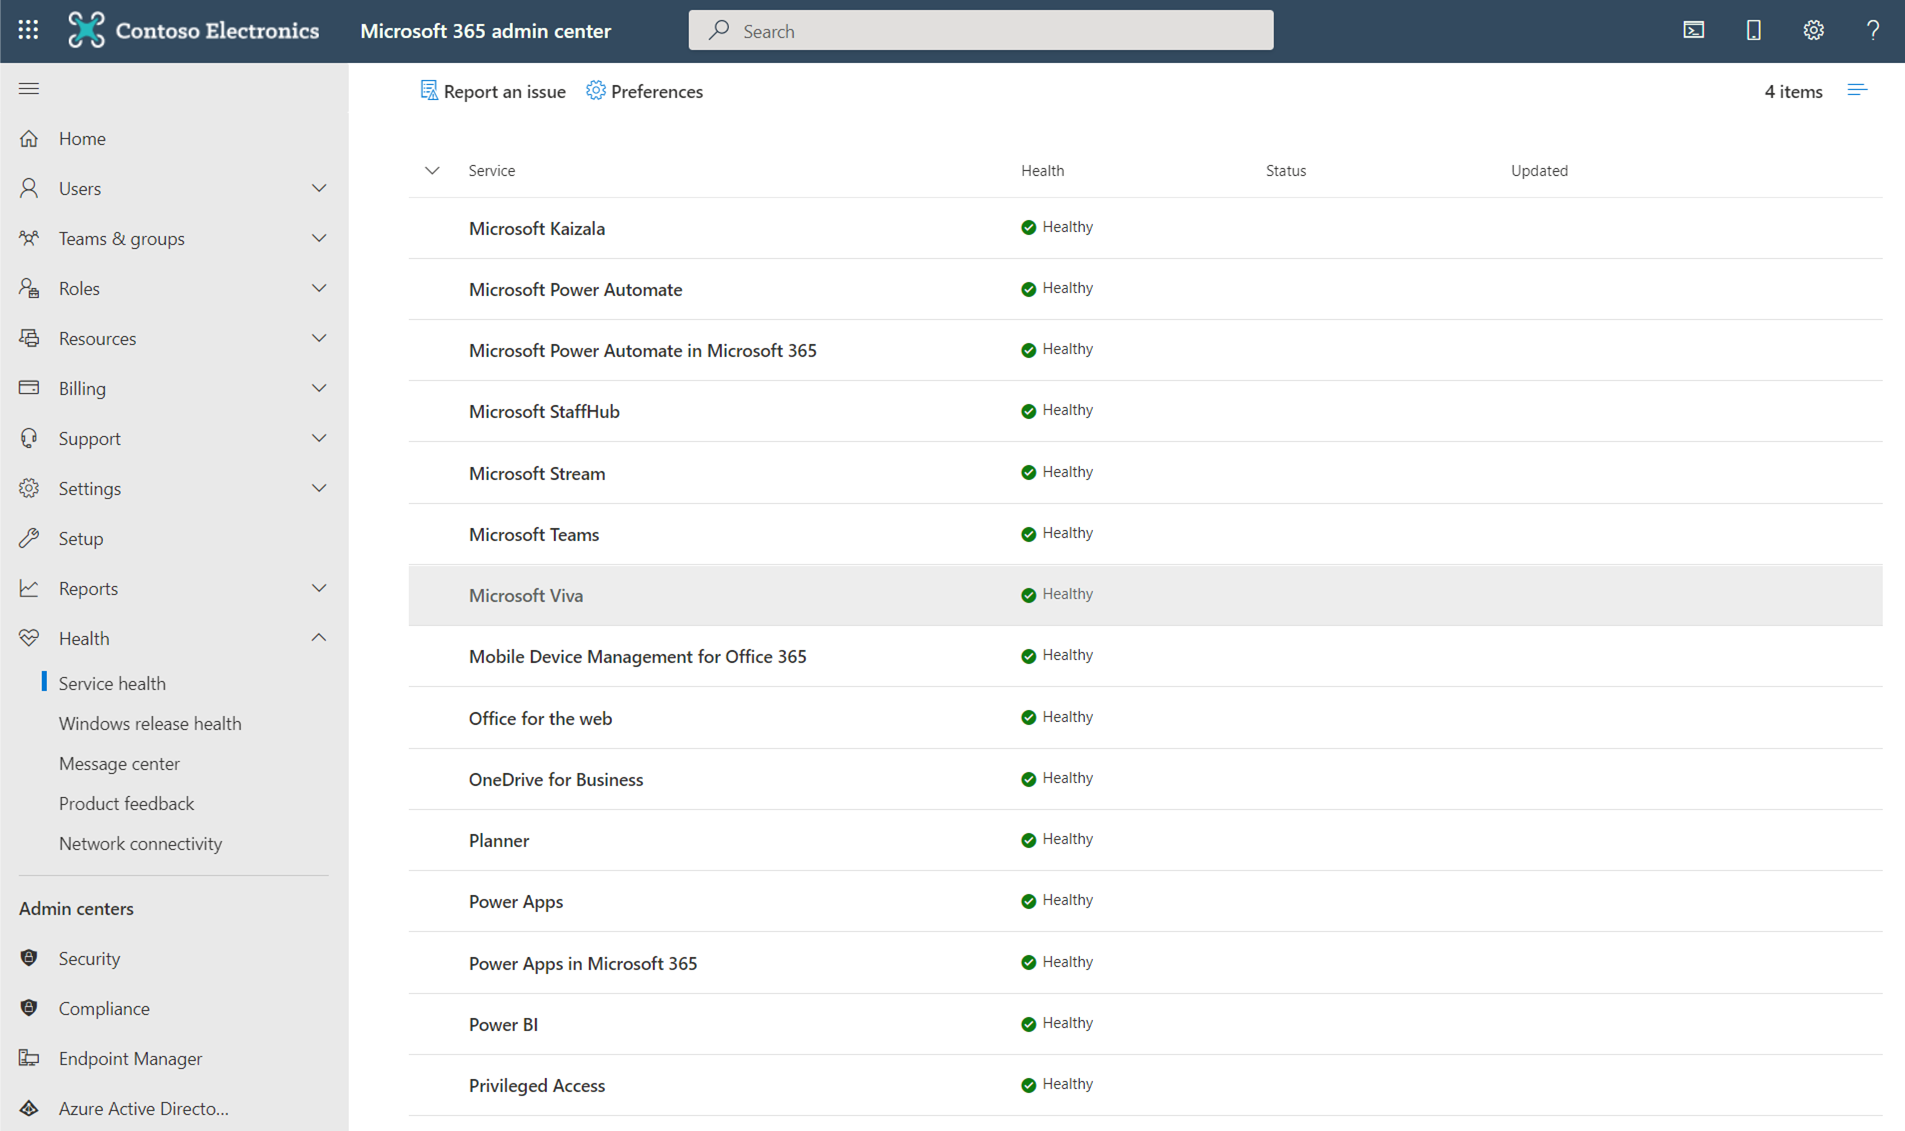 As a first step, administrators looking for Service health information related to Viva Topics, Viva Insights, Viva Connections, and Viva Learning should look under the ‘Microsoft Viva’ service listing within Service health, in Microsoft 365 admin center.